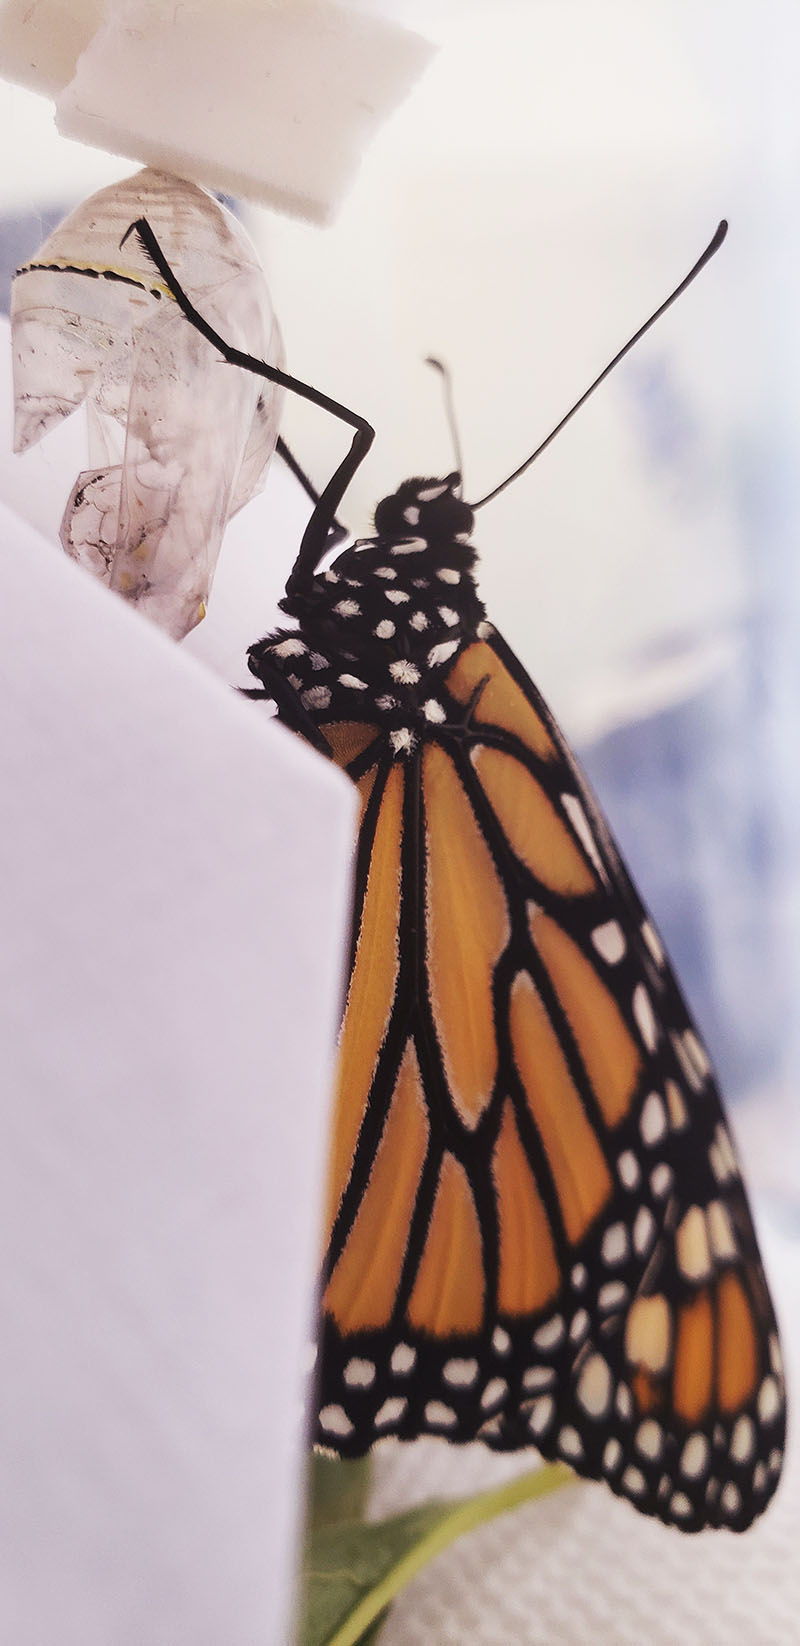 Monarch butterfly emerge from chrysalis